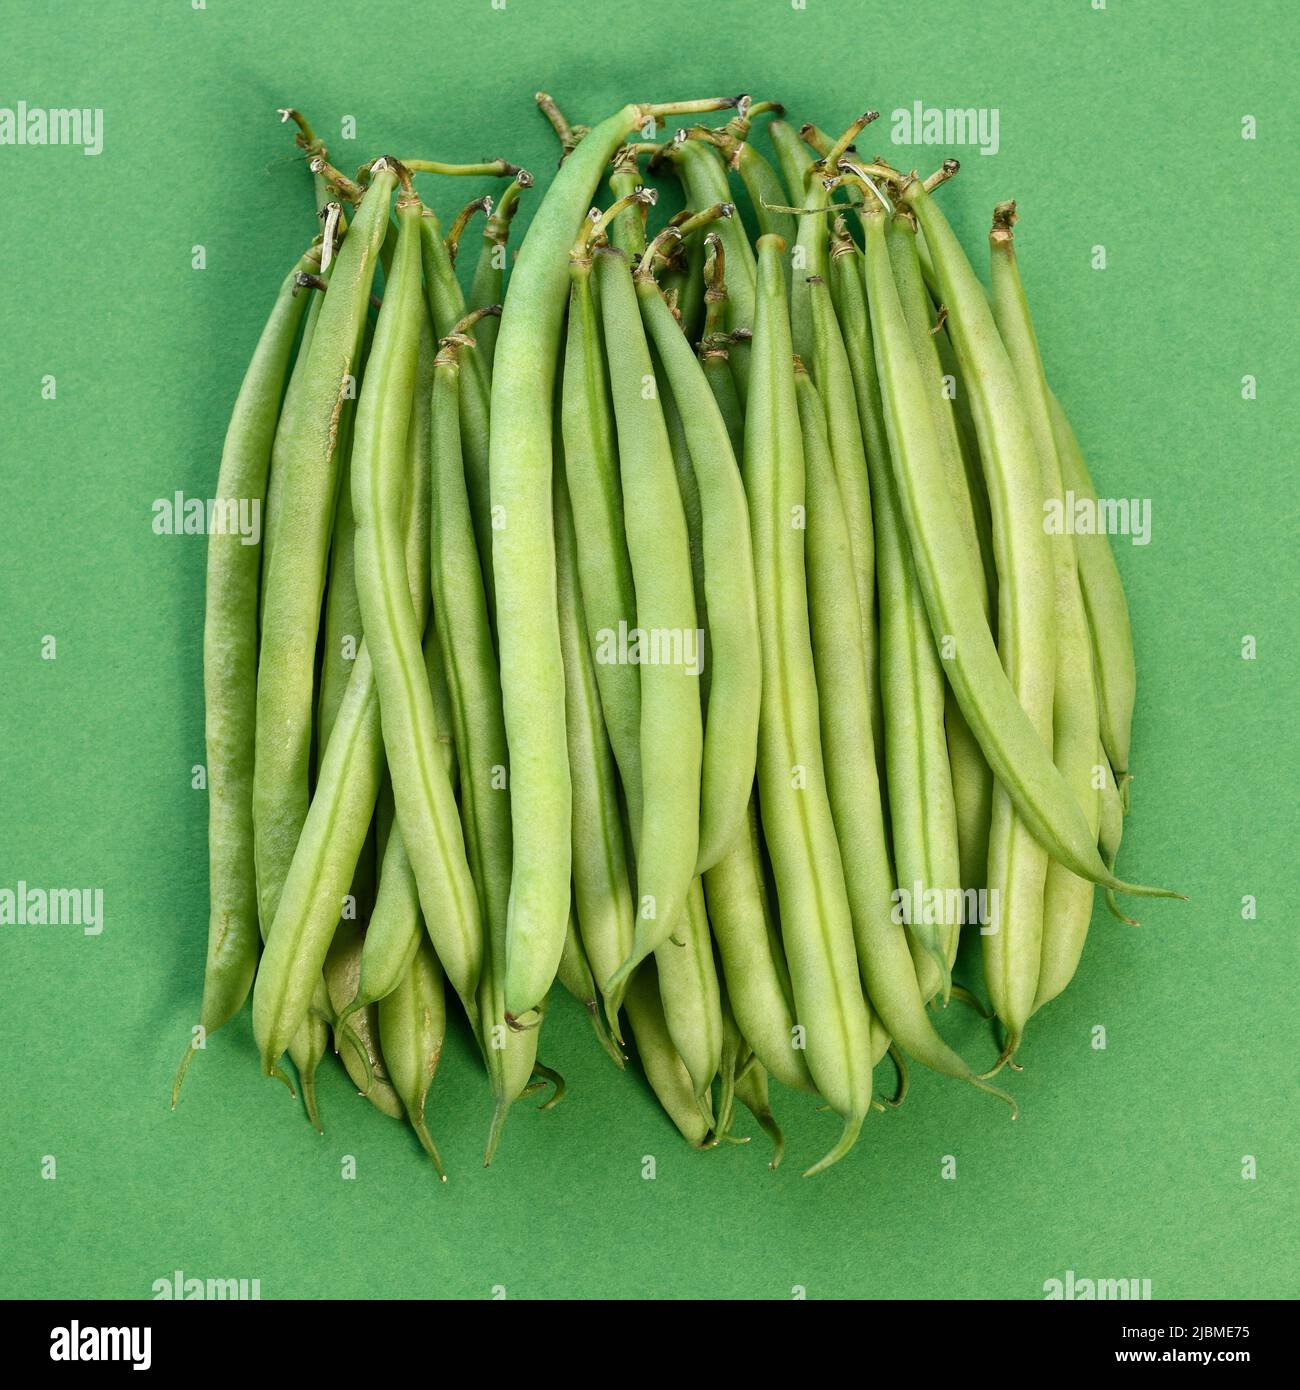 A pile of green french beans on a green background Stock Photo